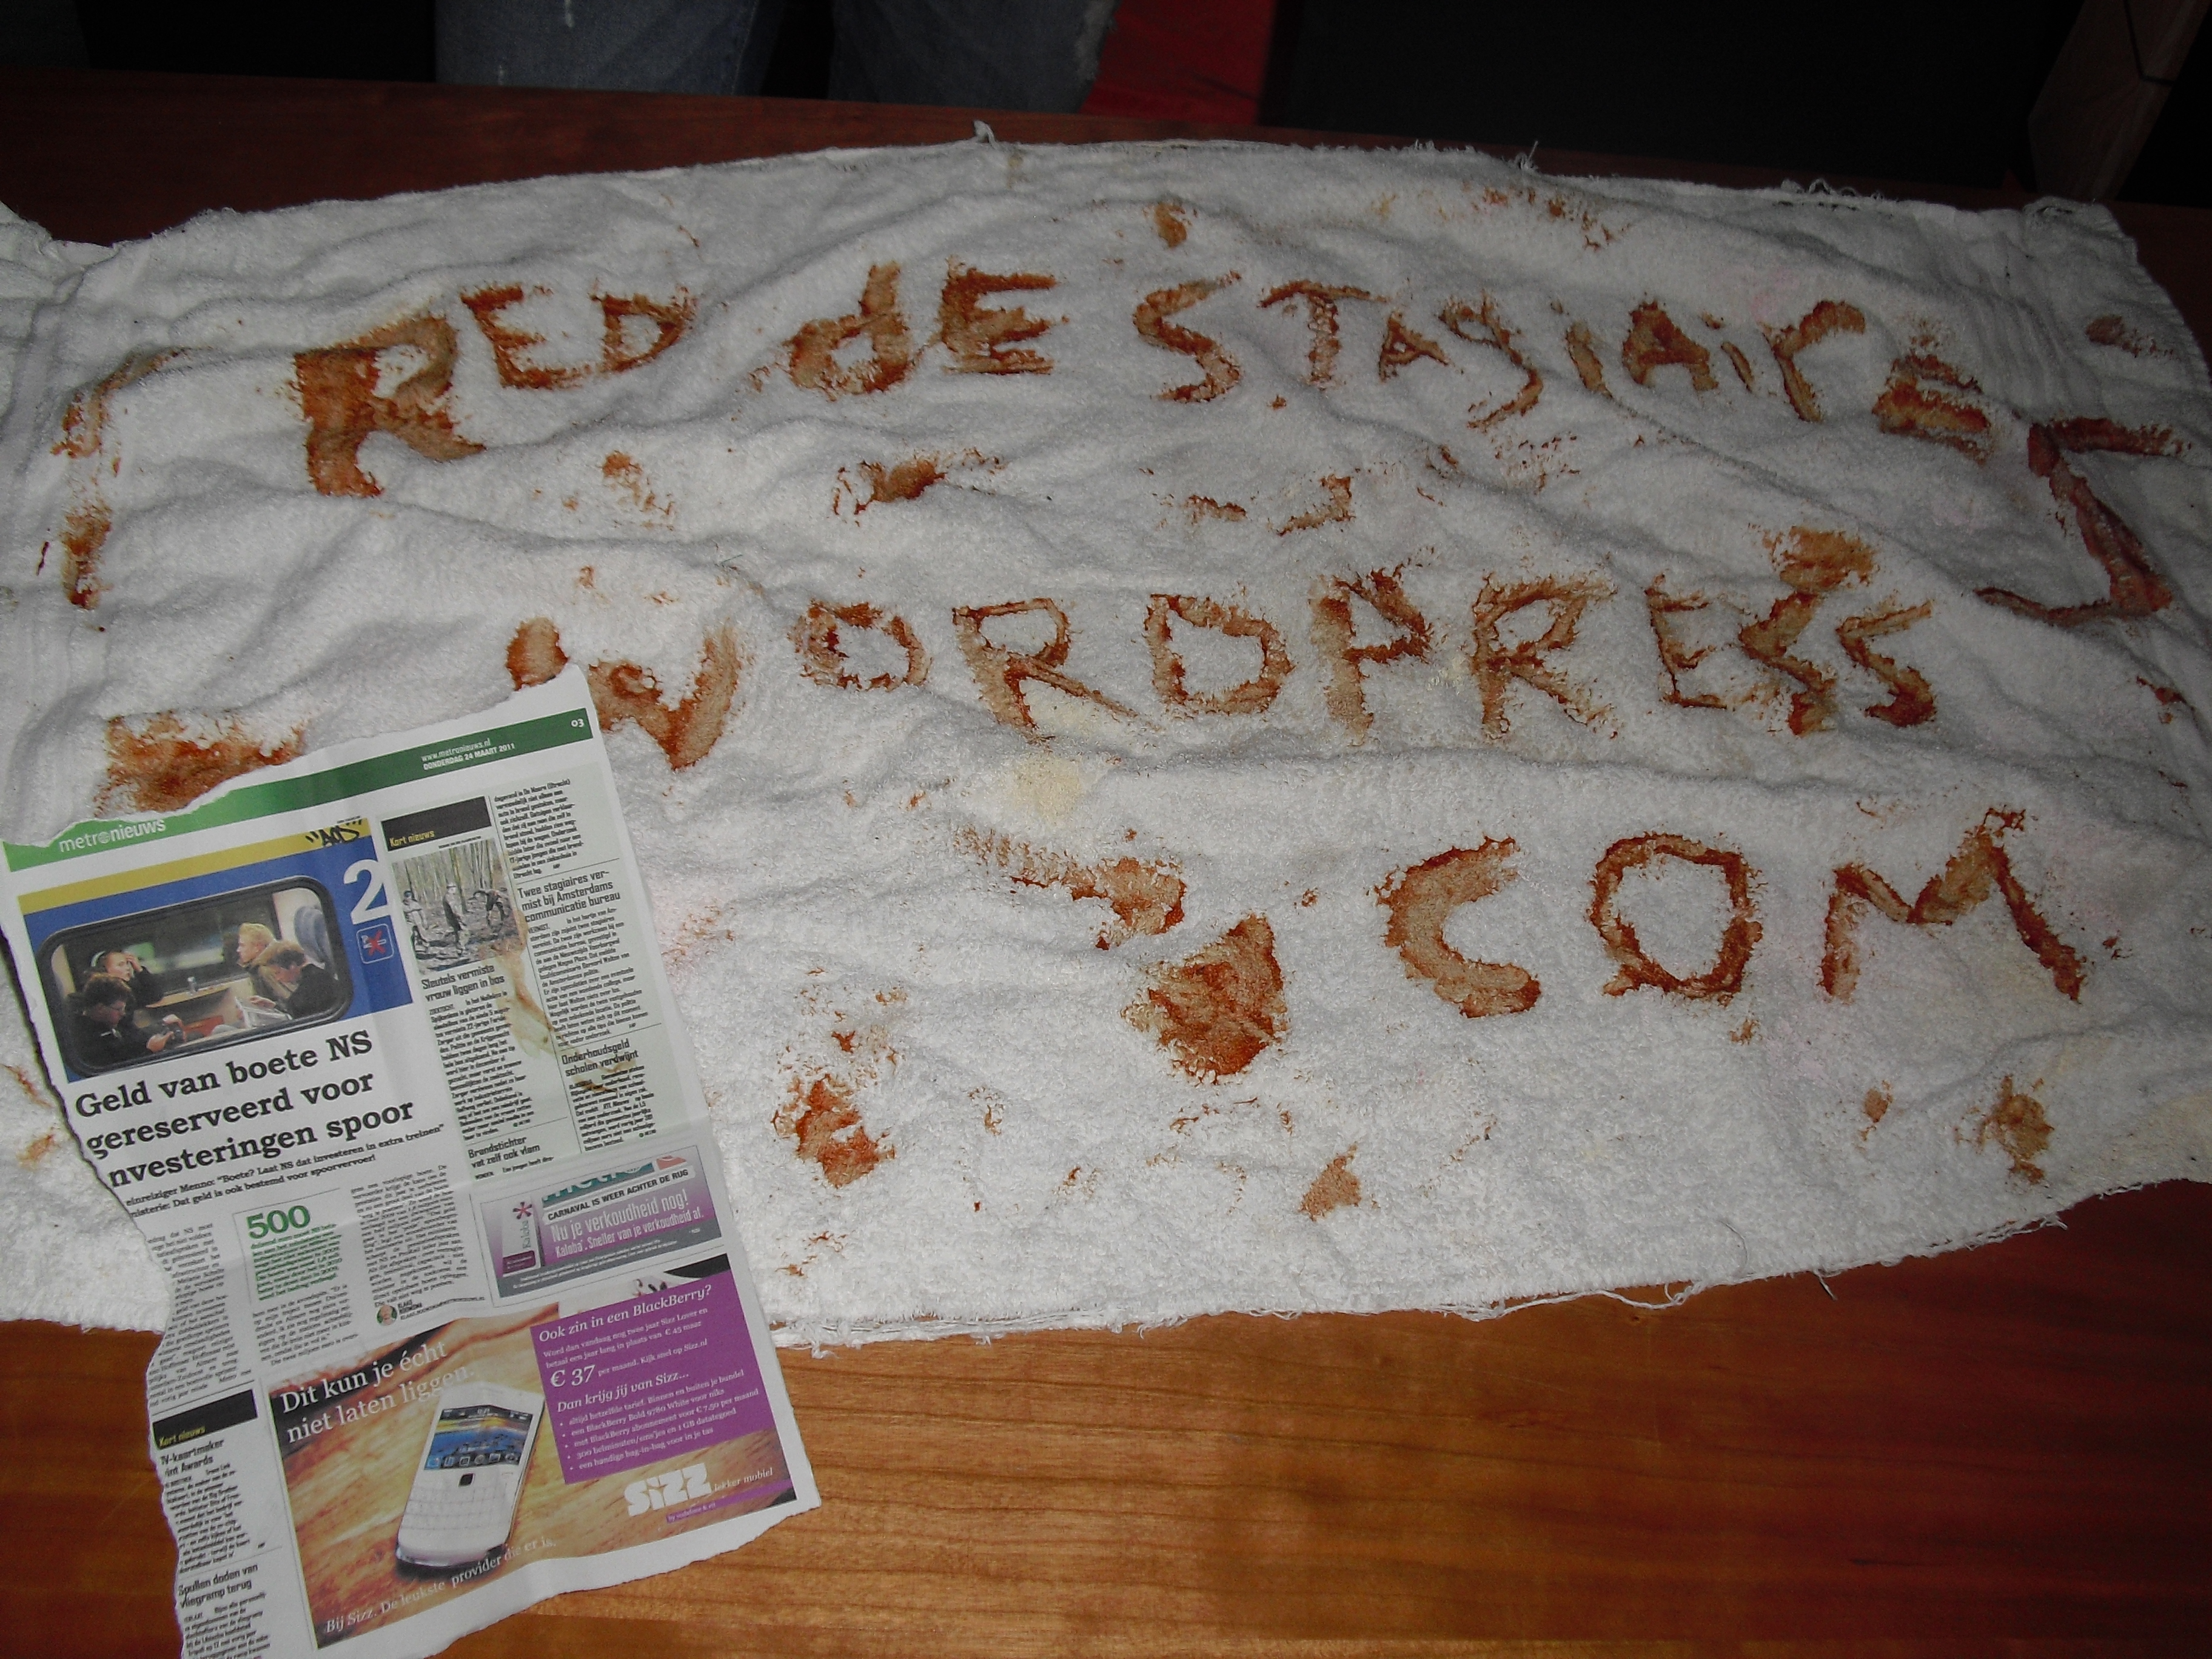 Frontpage of a newspaper and a towel with blood